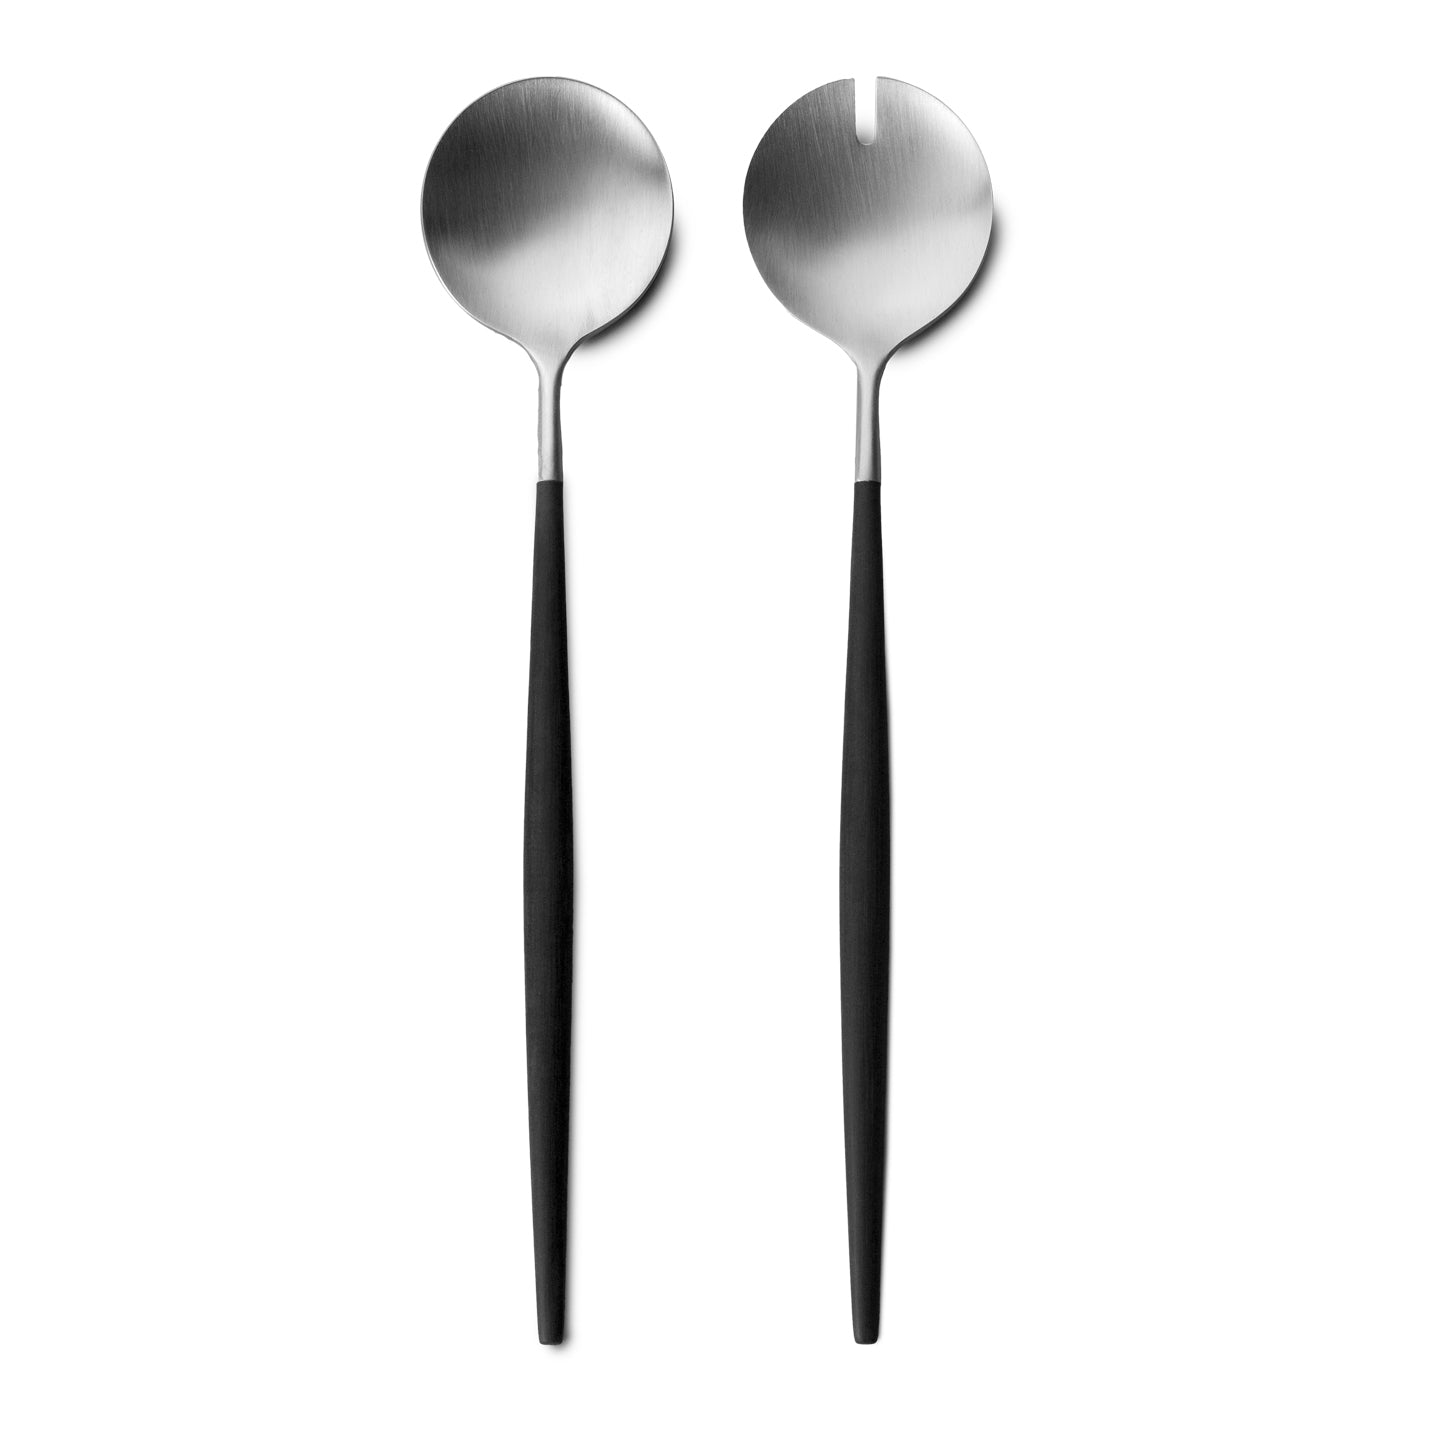 Cutipol Goa Salad Servers / Boxed / Black and Stainless Steel